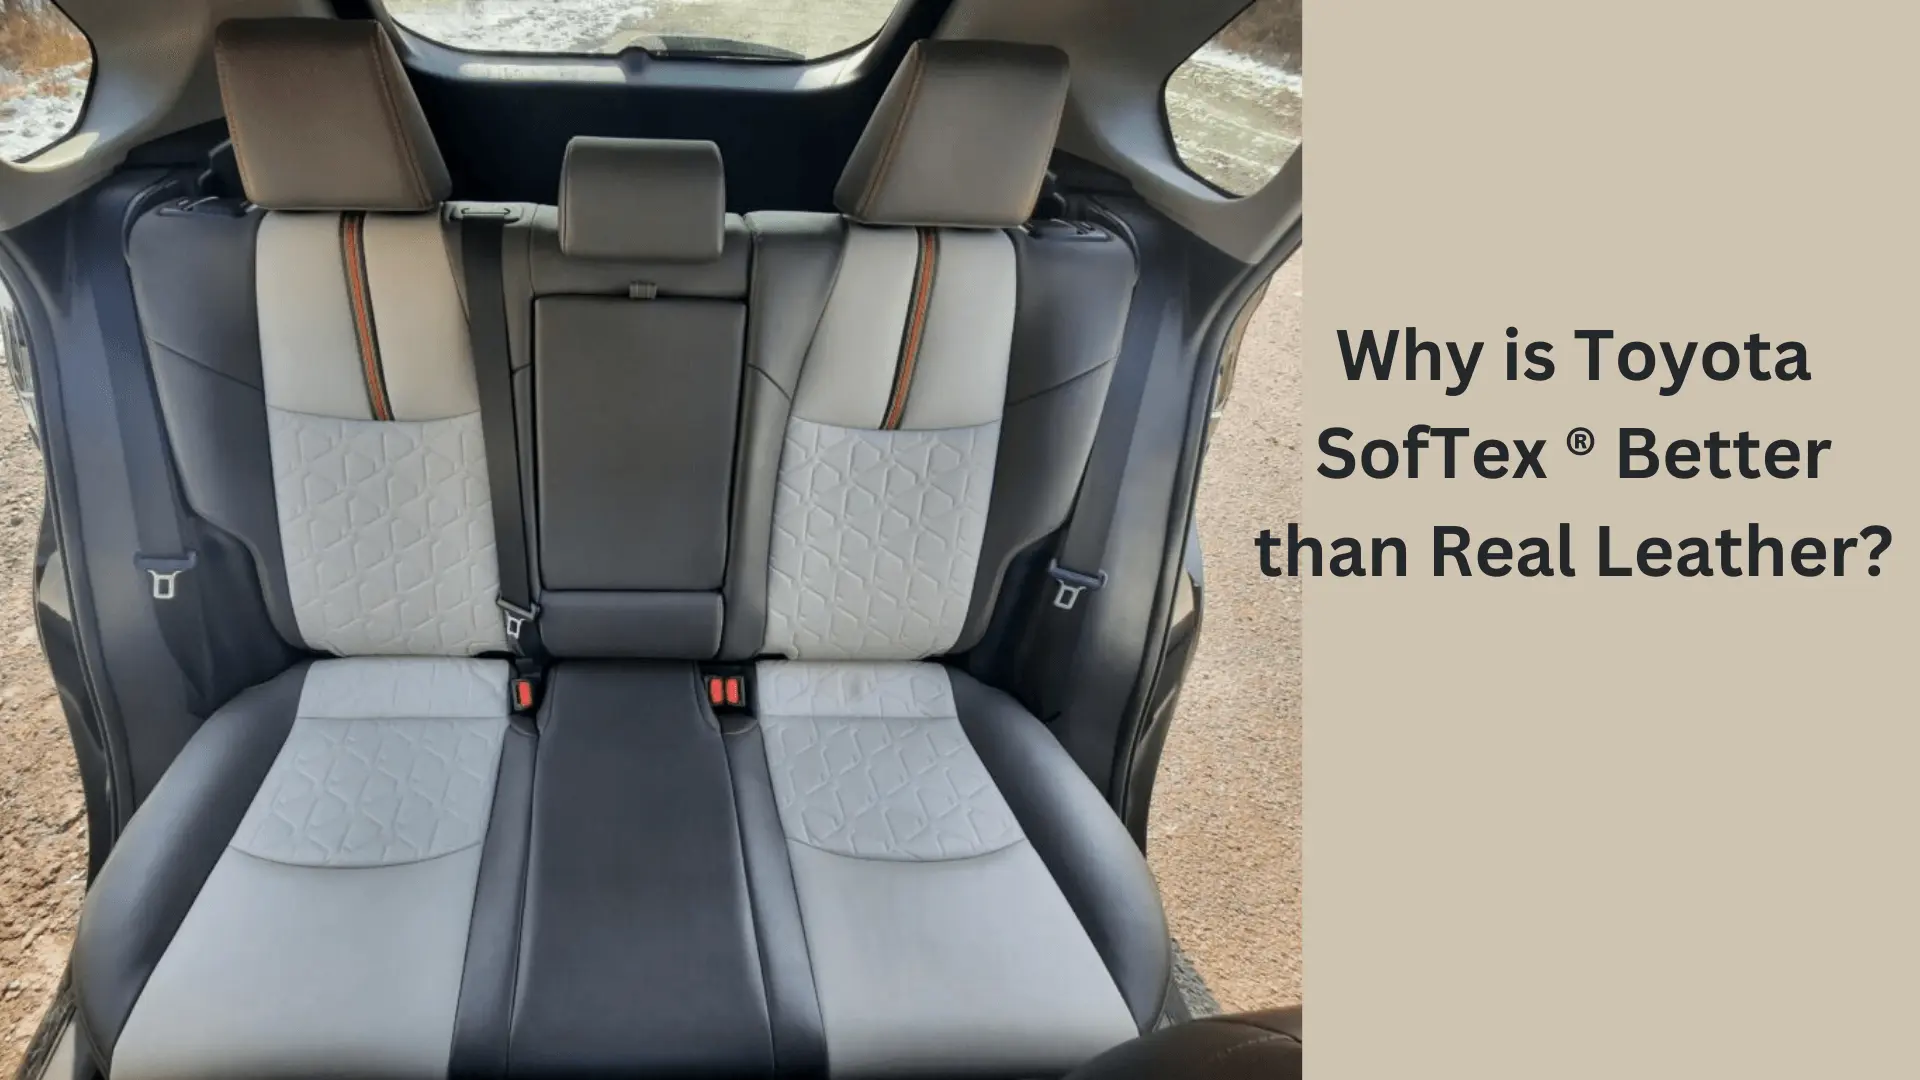 Why is Toyota SofTex Better than Real Leather